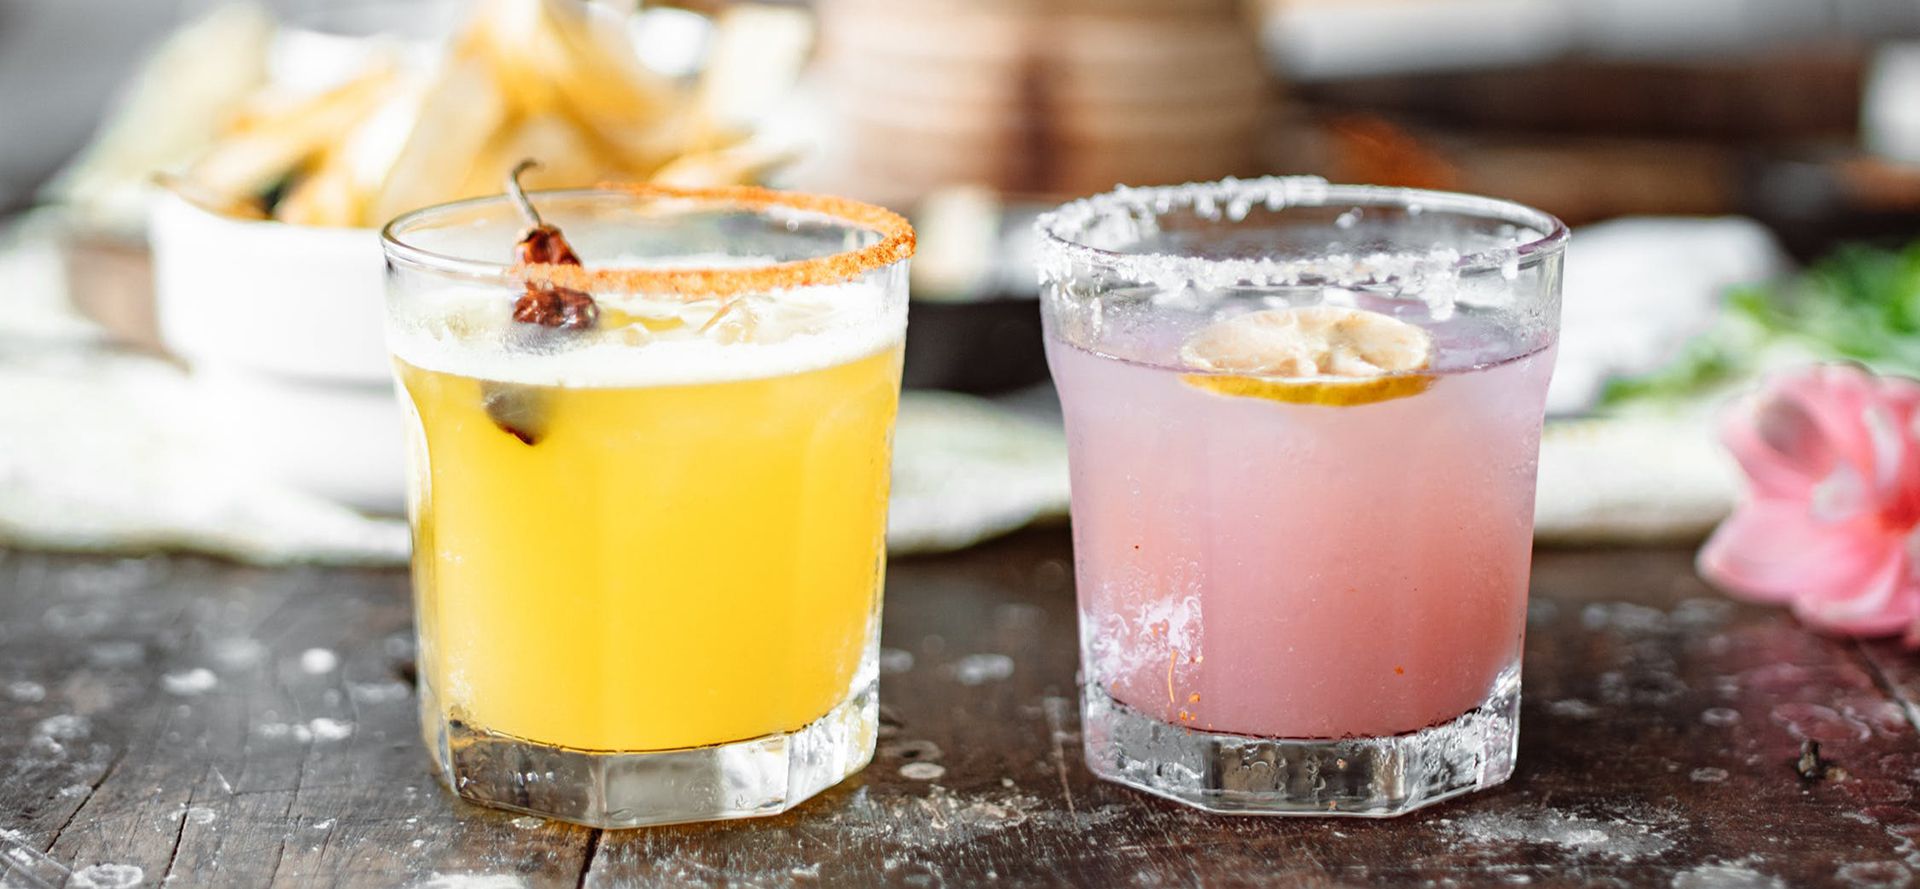 Guava And Pineapple Vodka Coctails.